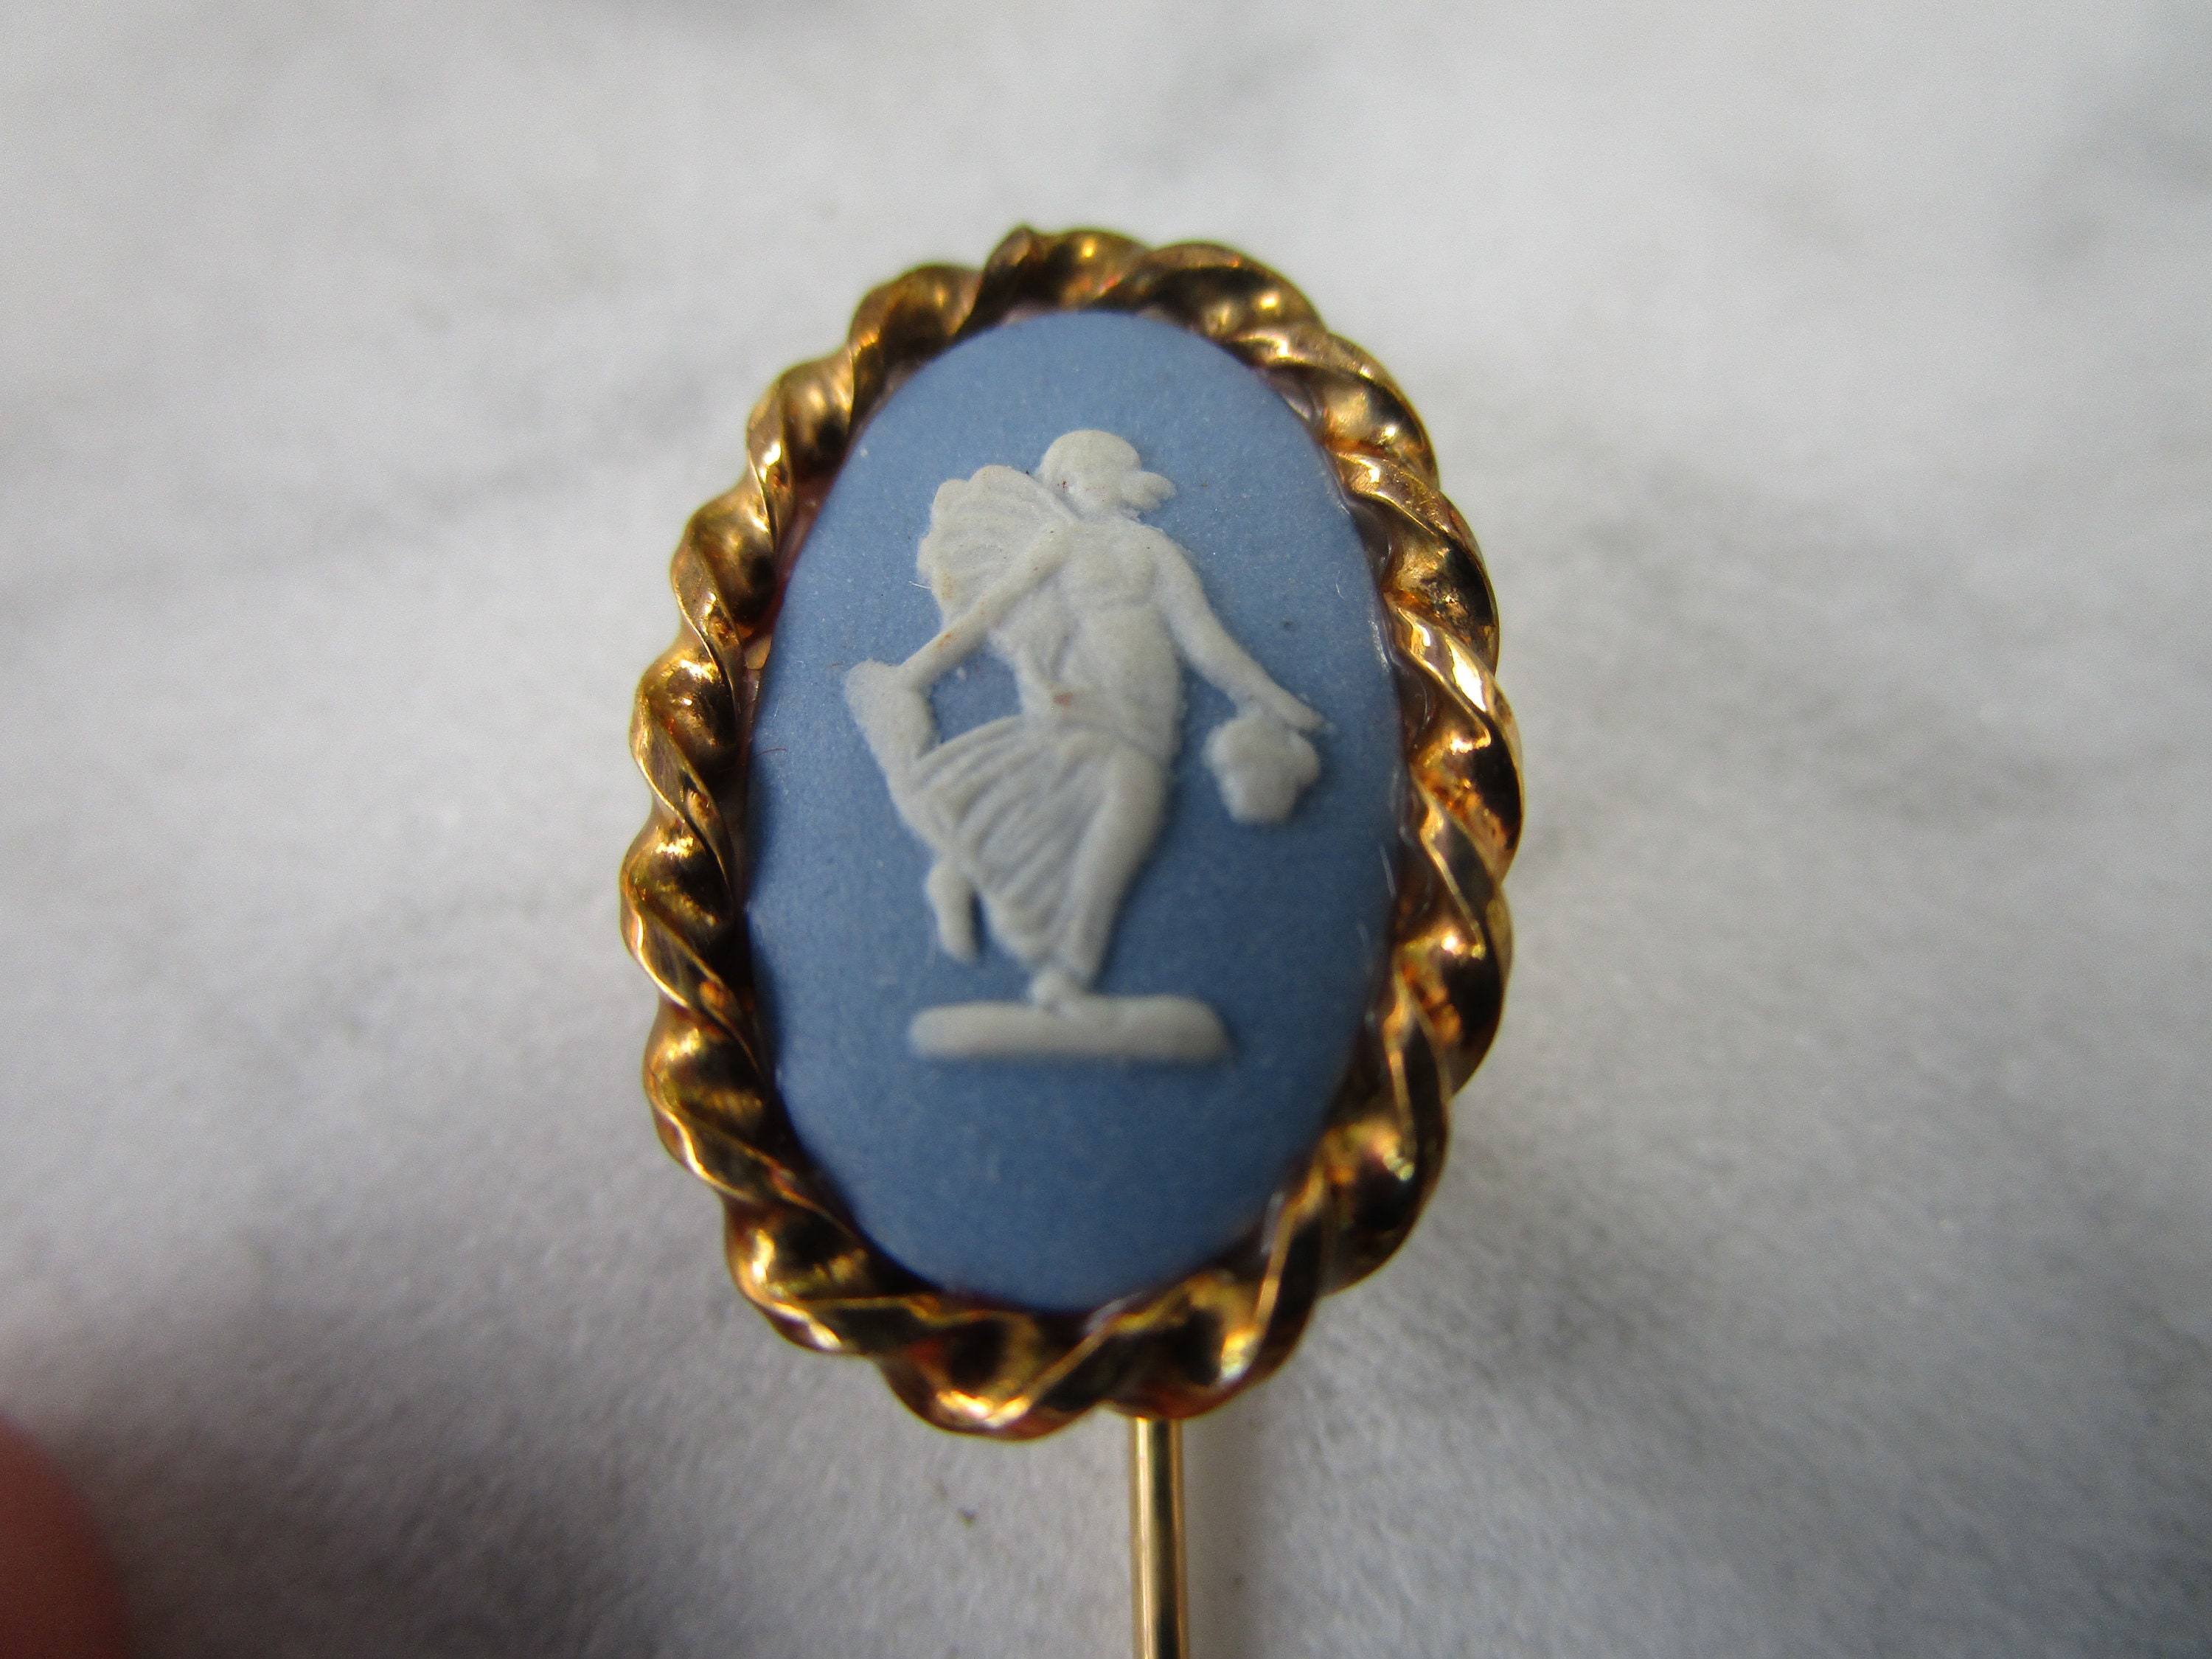 100 Soft Enamel Masonic Lapel Pin Badges Round Shape Wedgwood Cameo Brooch  For Crafting And Metal Crafts Dro266b From Uxkst, $89.36